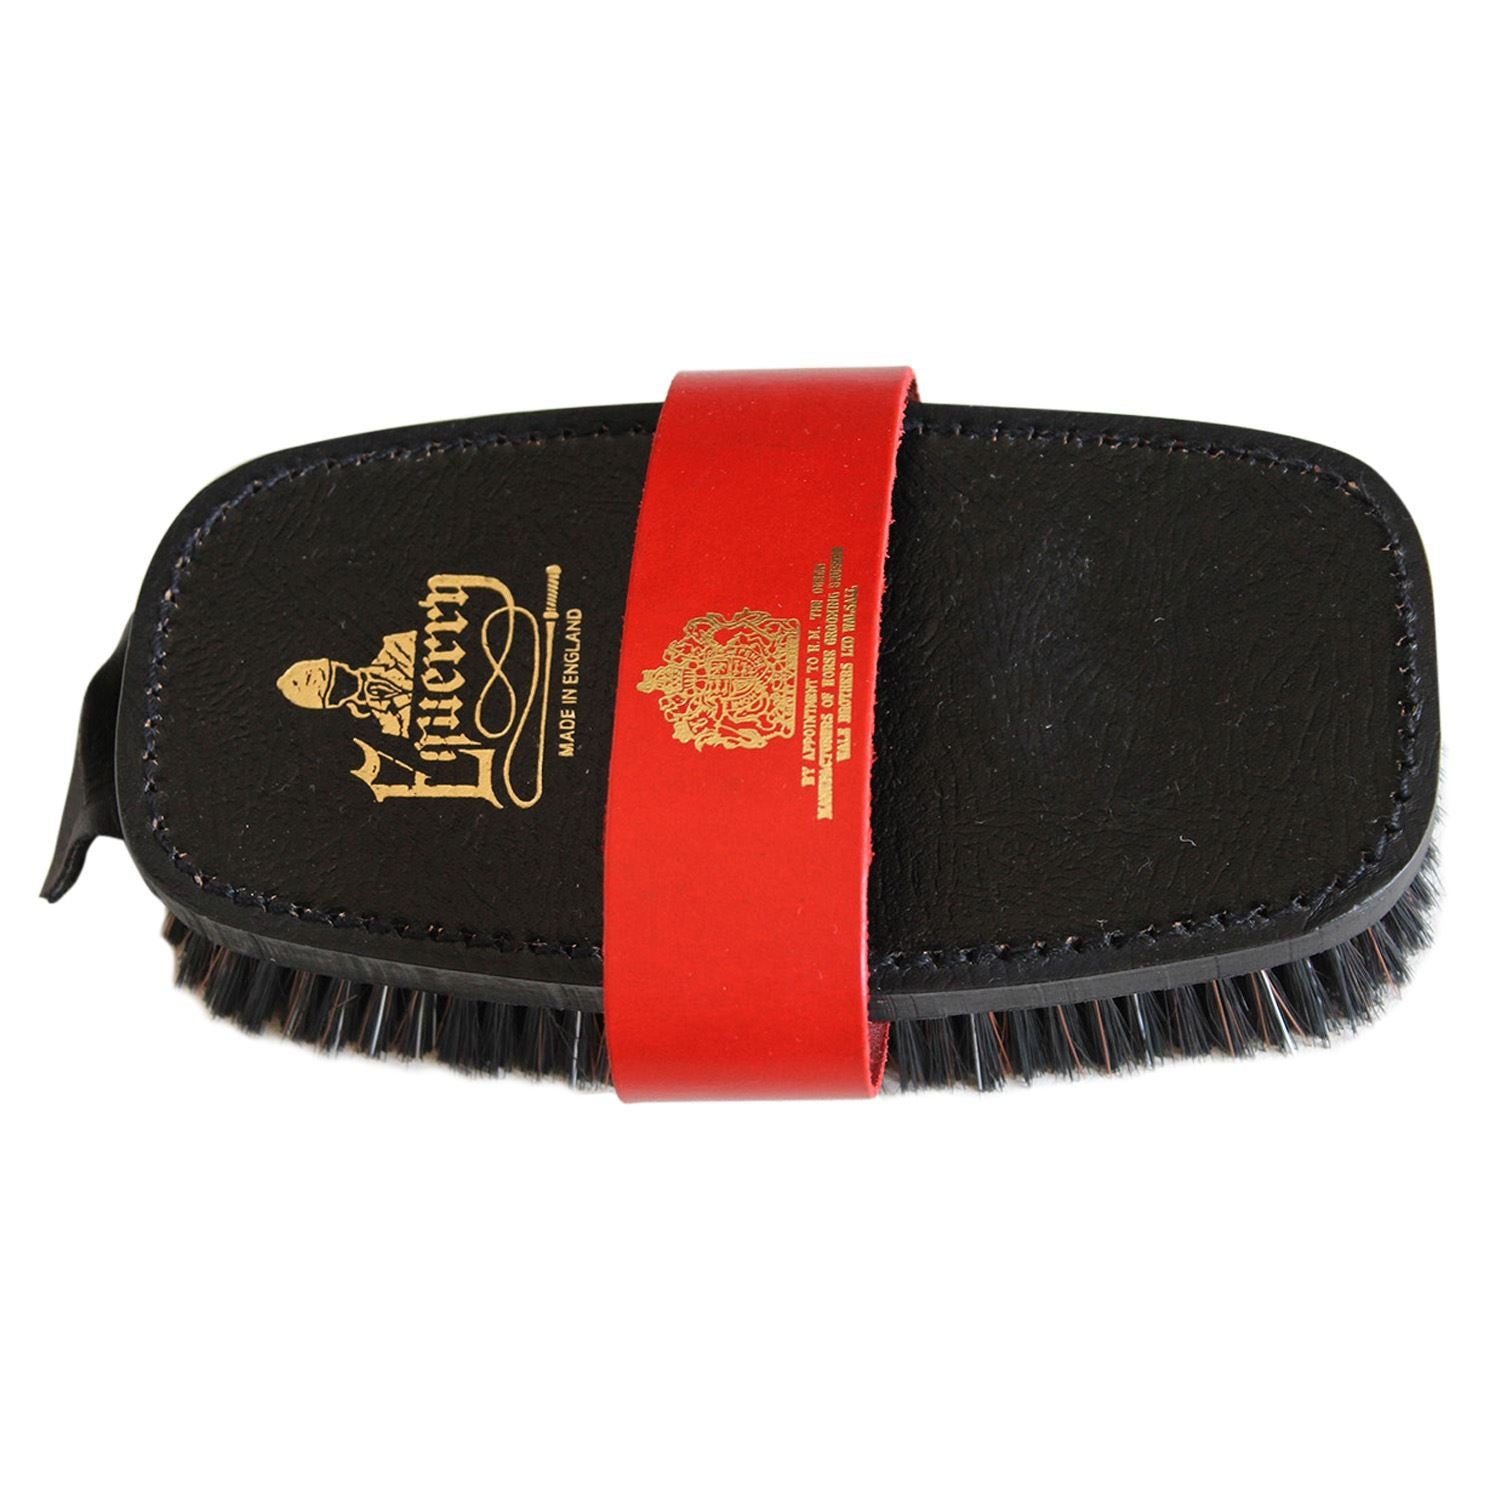 Vale Brothers Body Brush Professional - Just Horse Riders